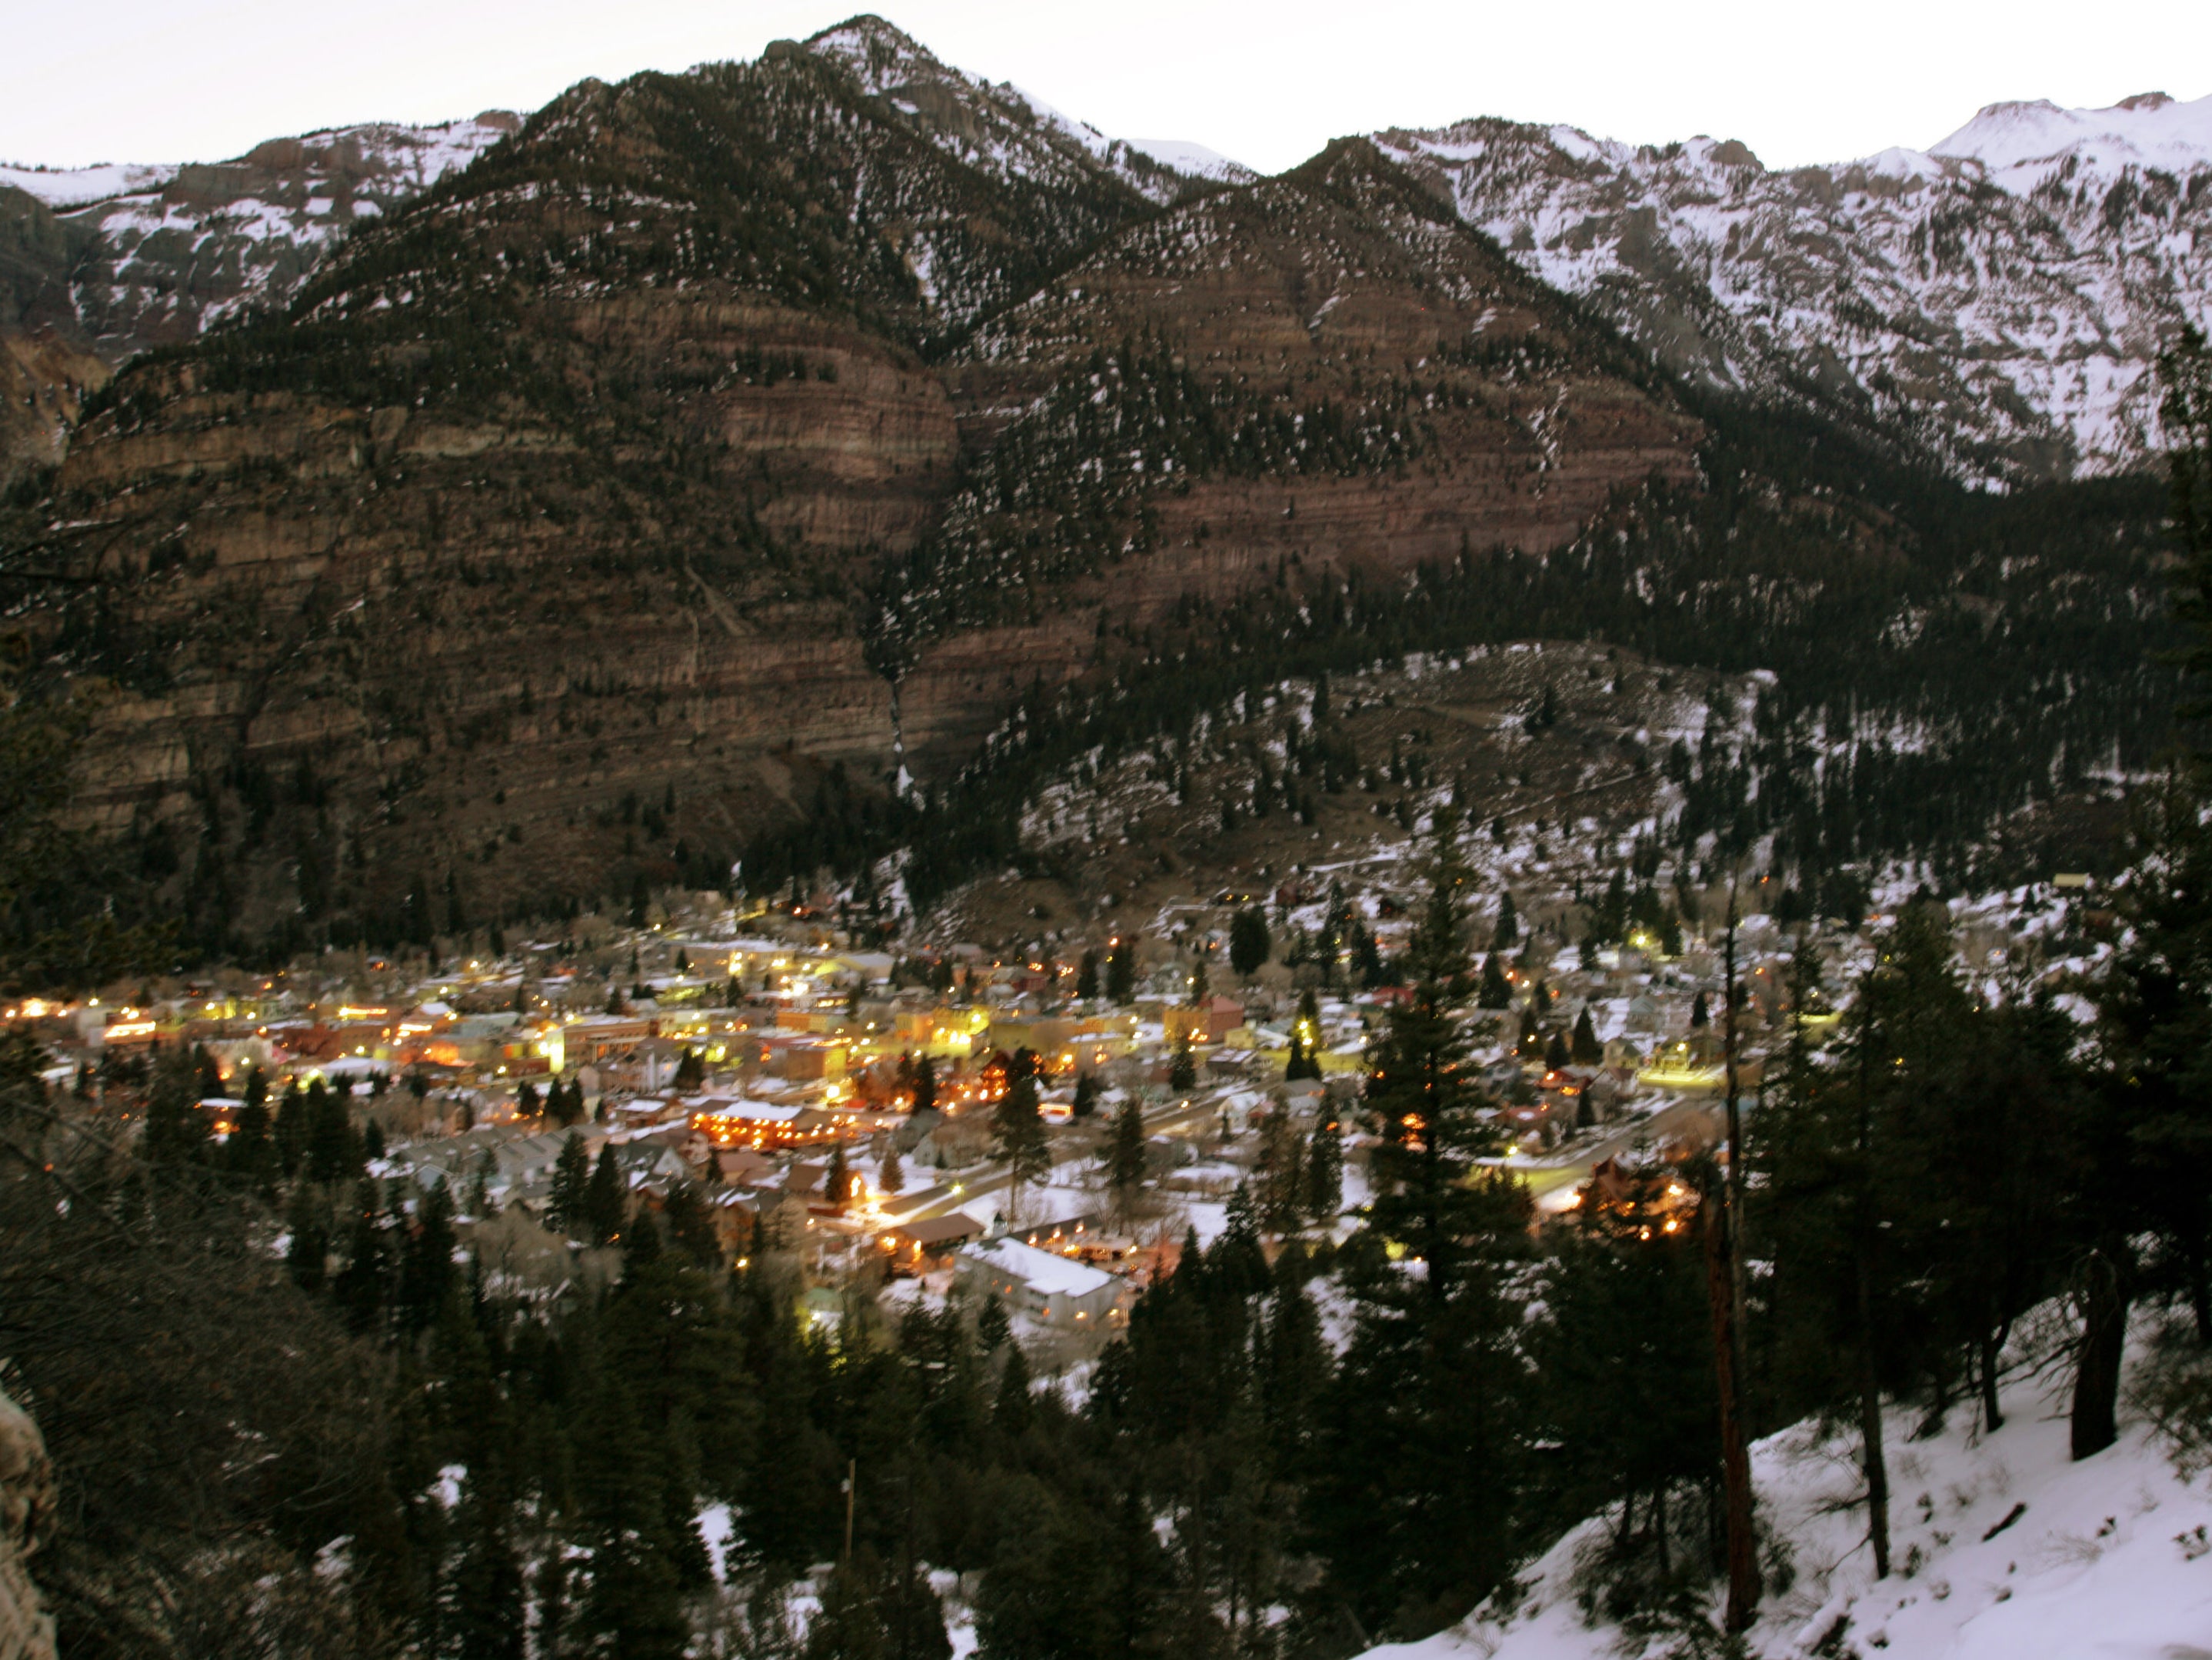 An entire print run of a newspaper circulated in Ouray, Colorado (above) were stolen by a man upset with the reporting of a sexual assault case